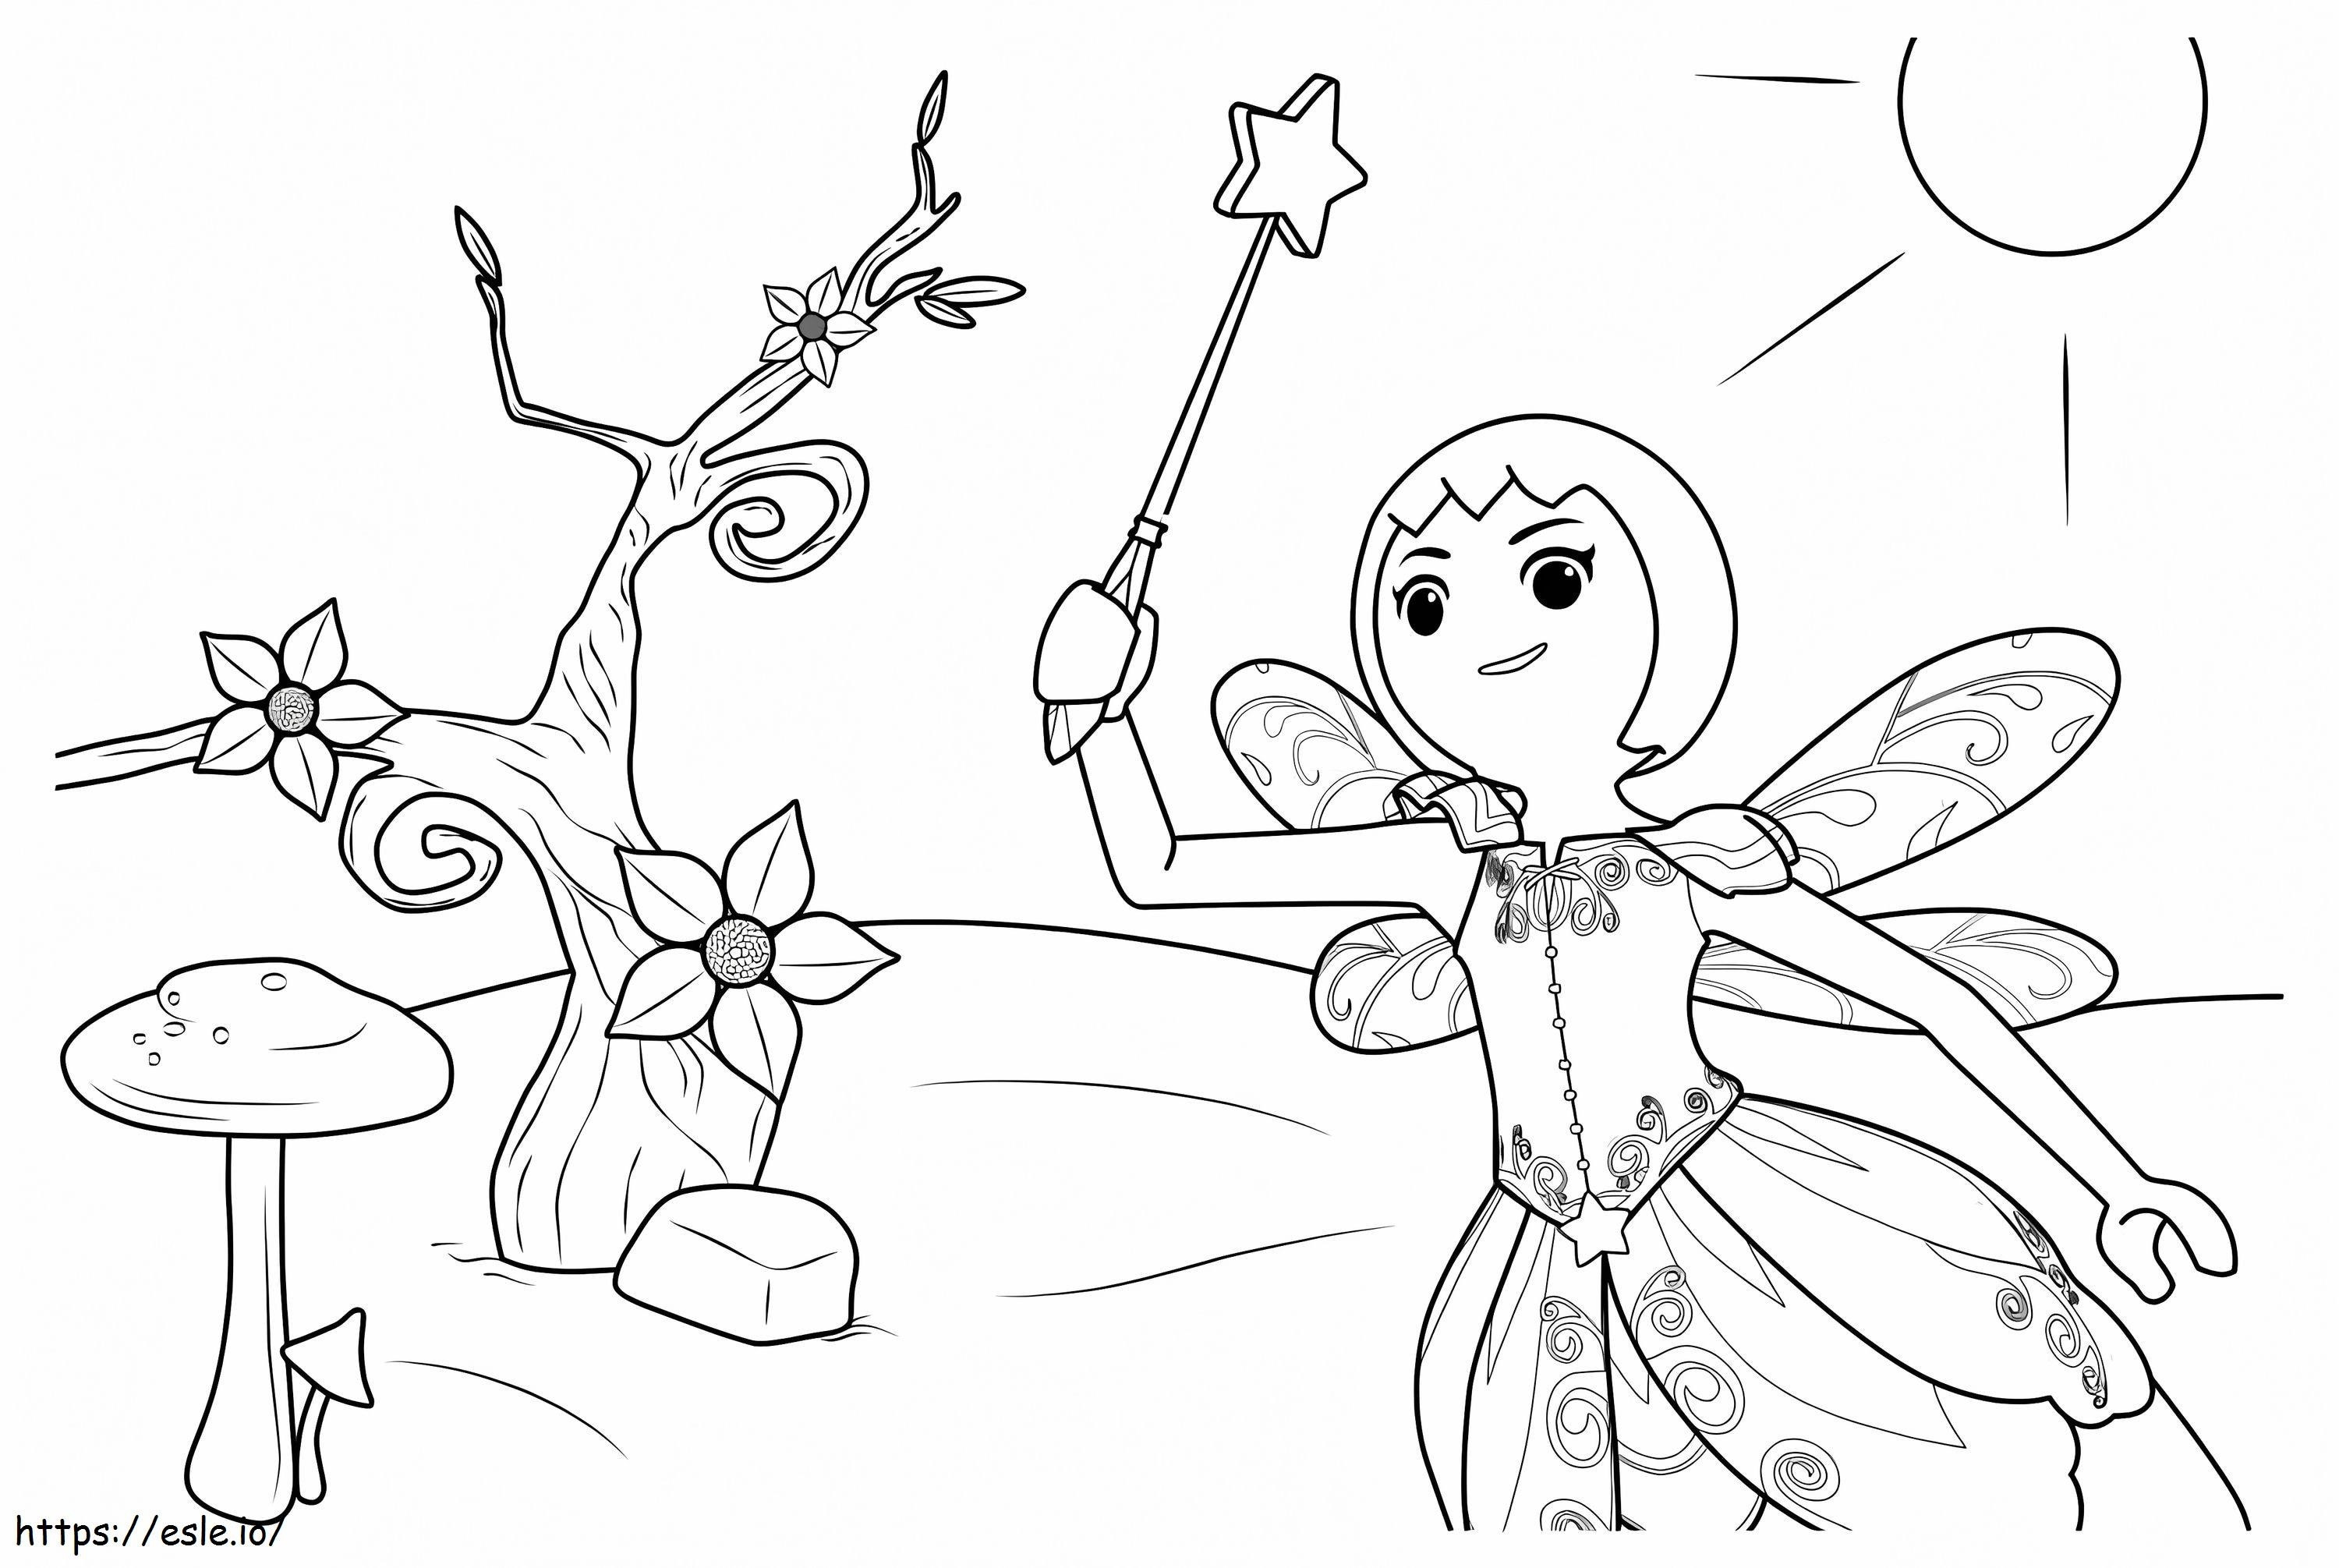 Fairy Playmobil coloring page